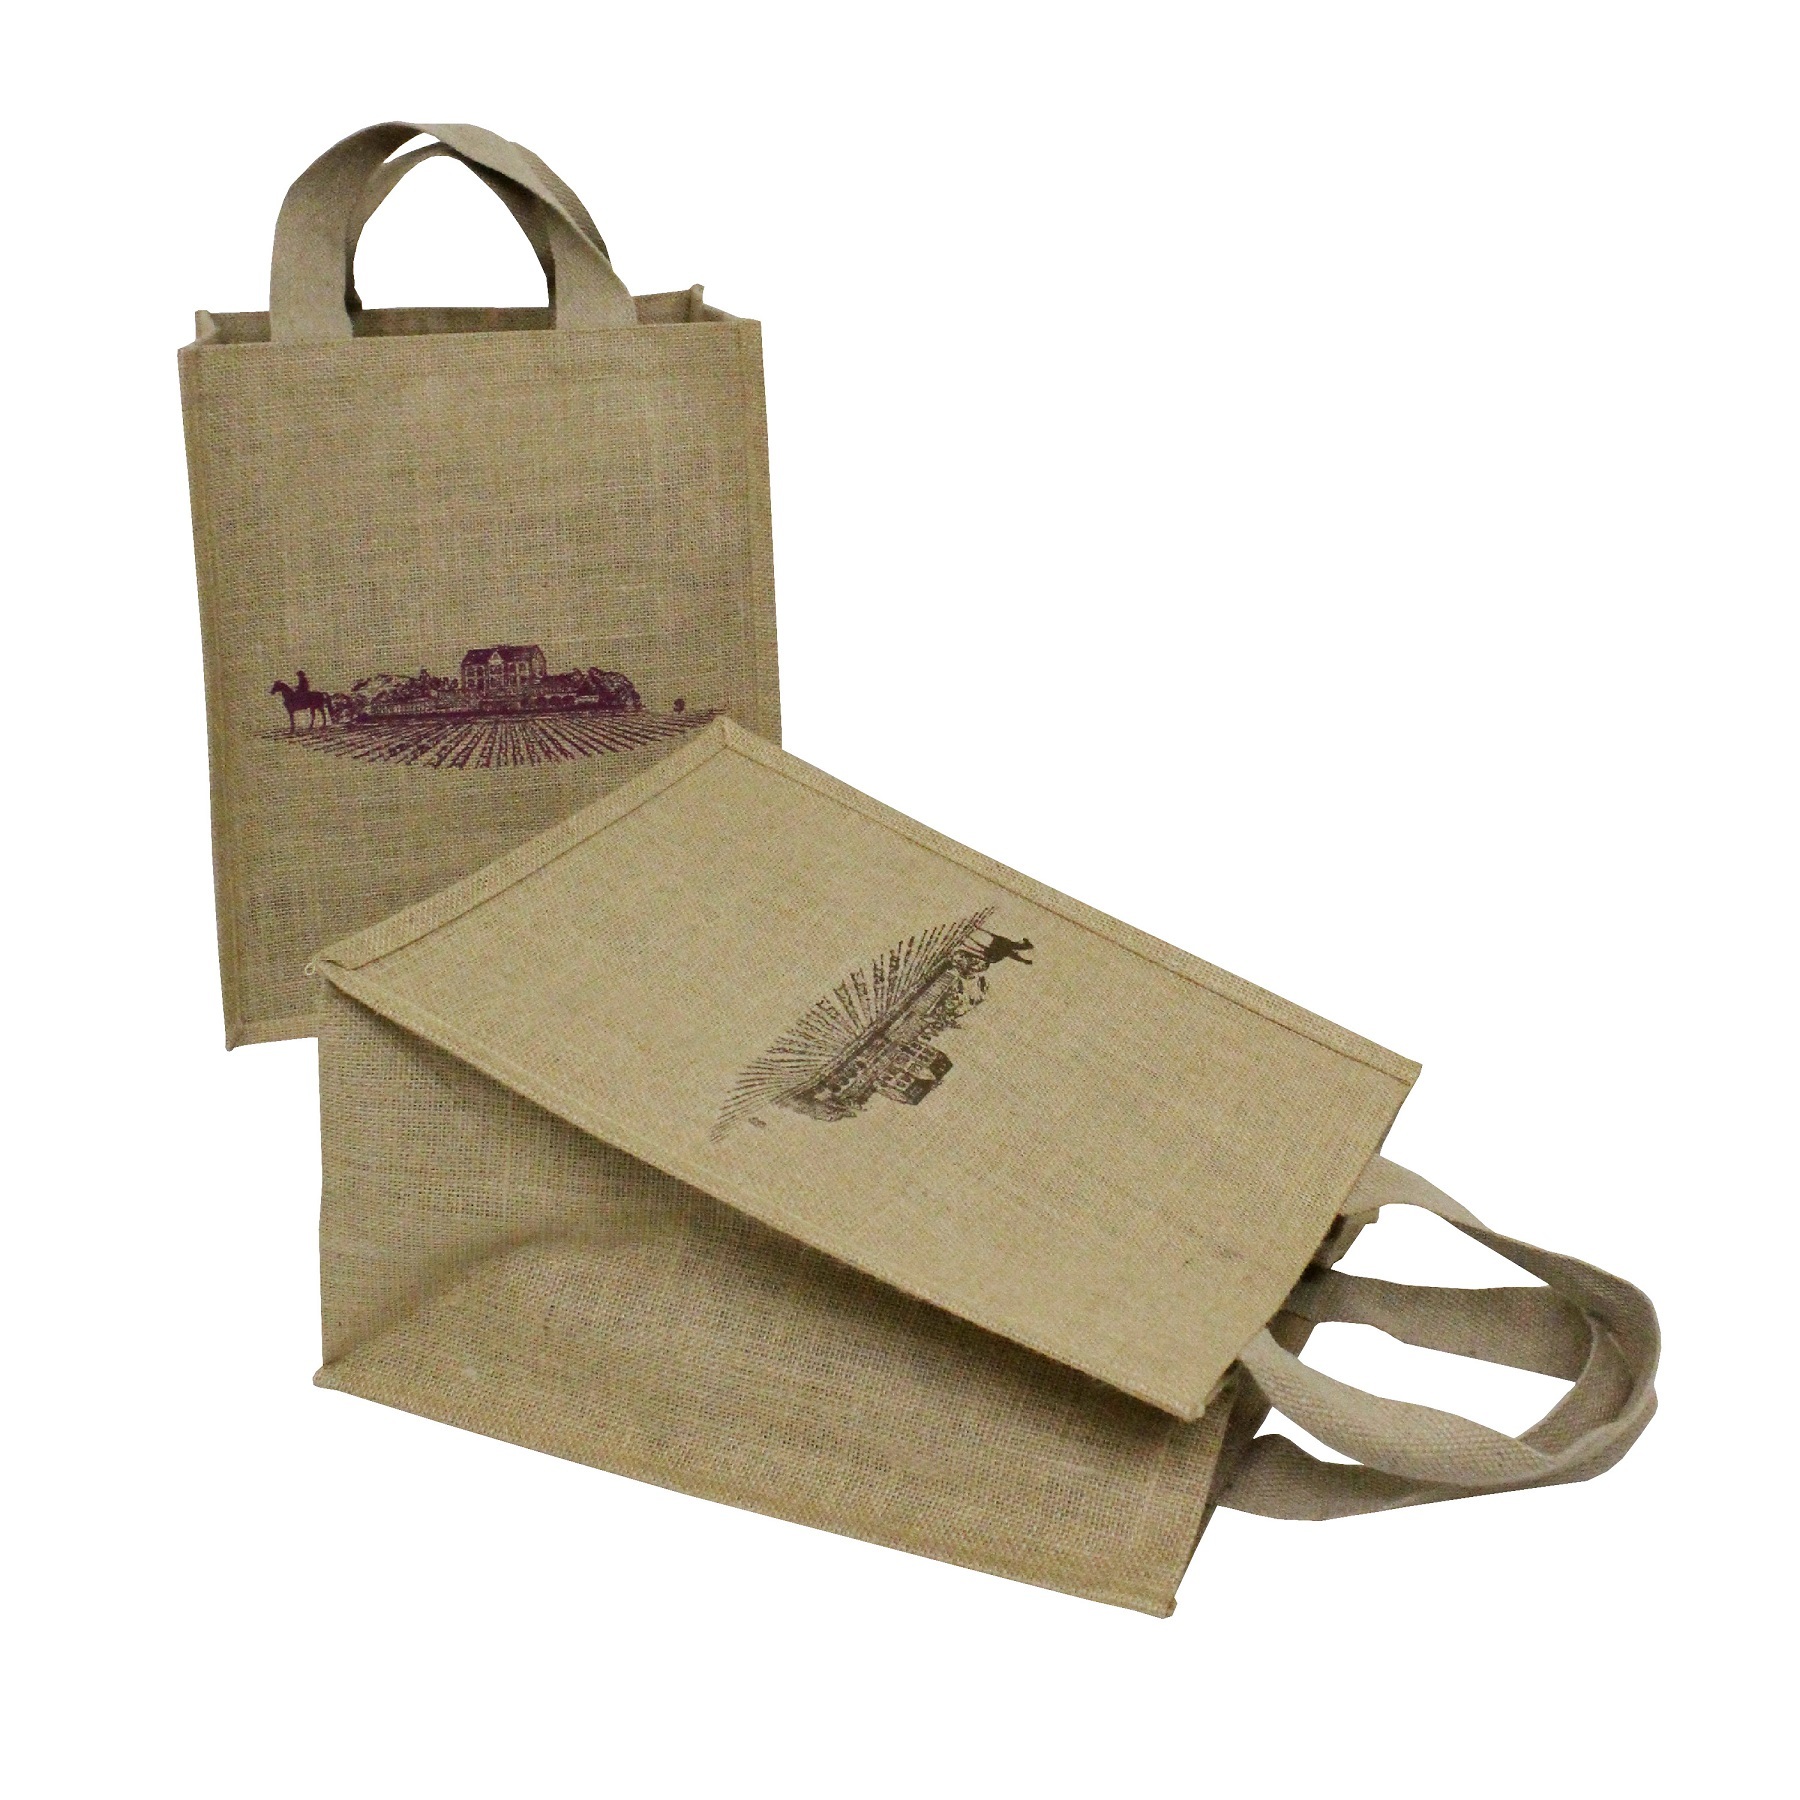 PP Laminated Jute Tote Bag With Cotton Web Handle